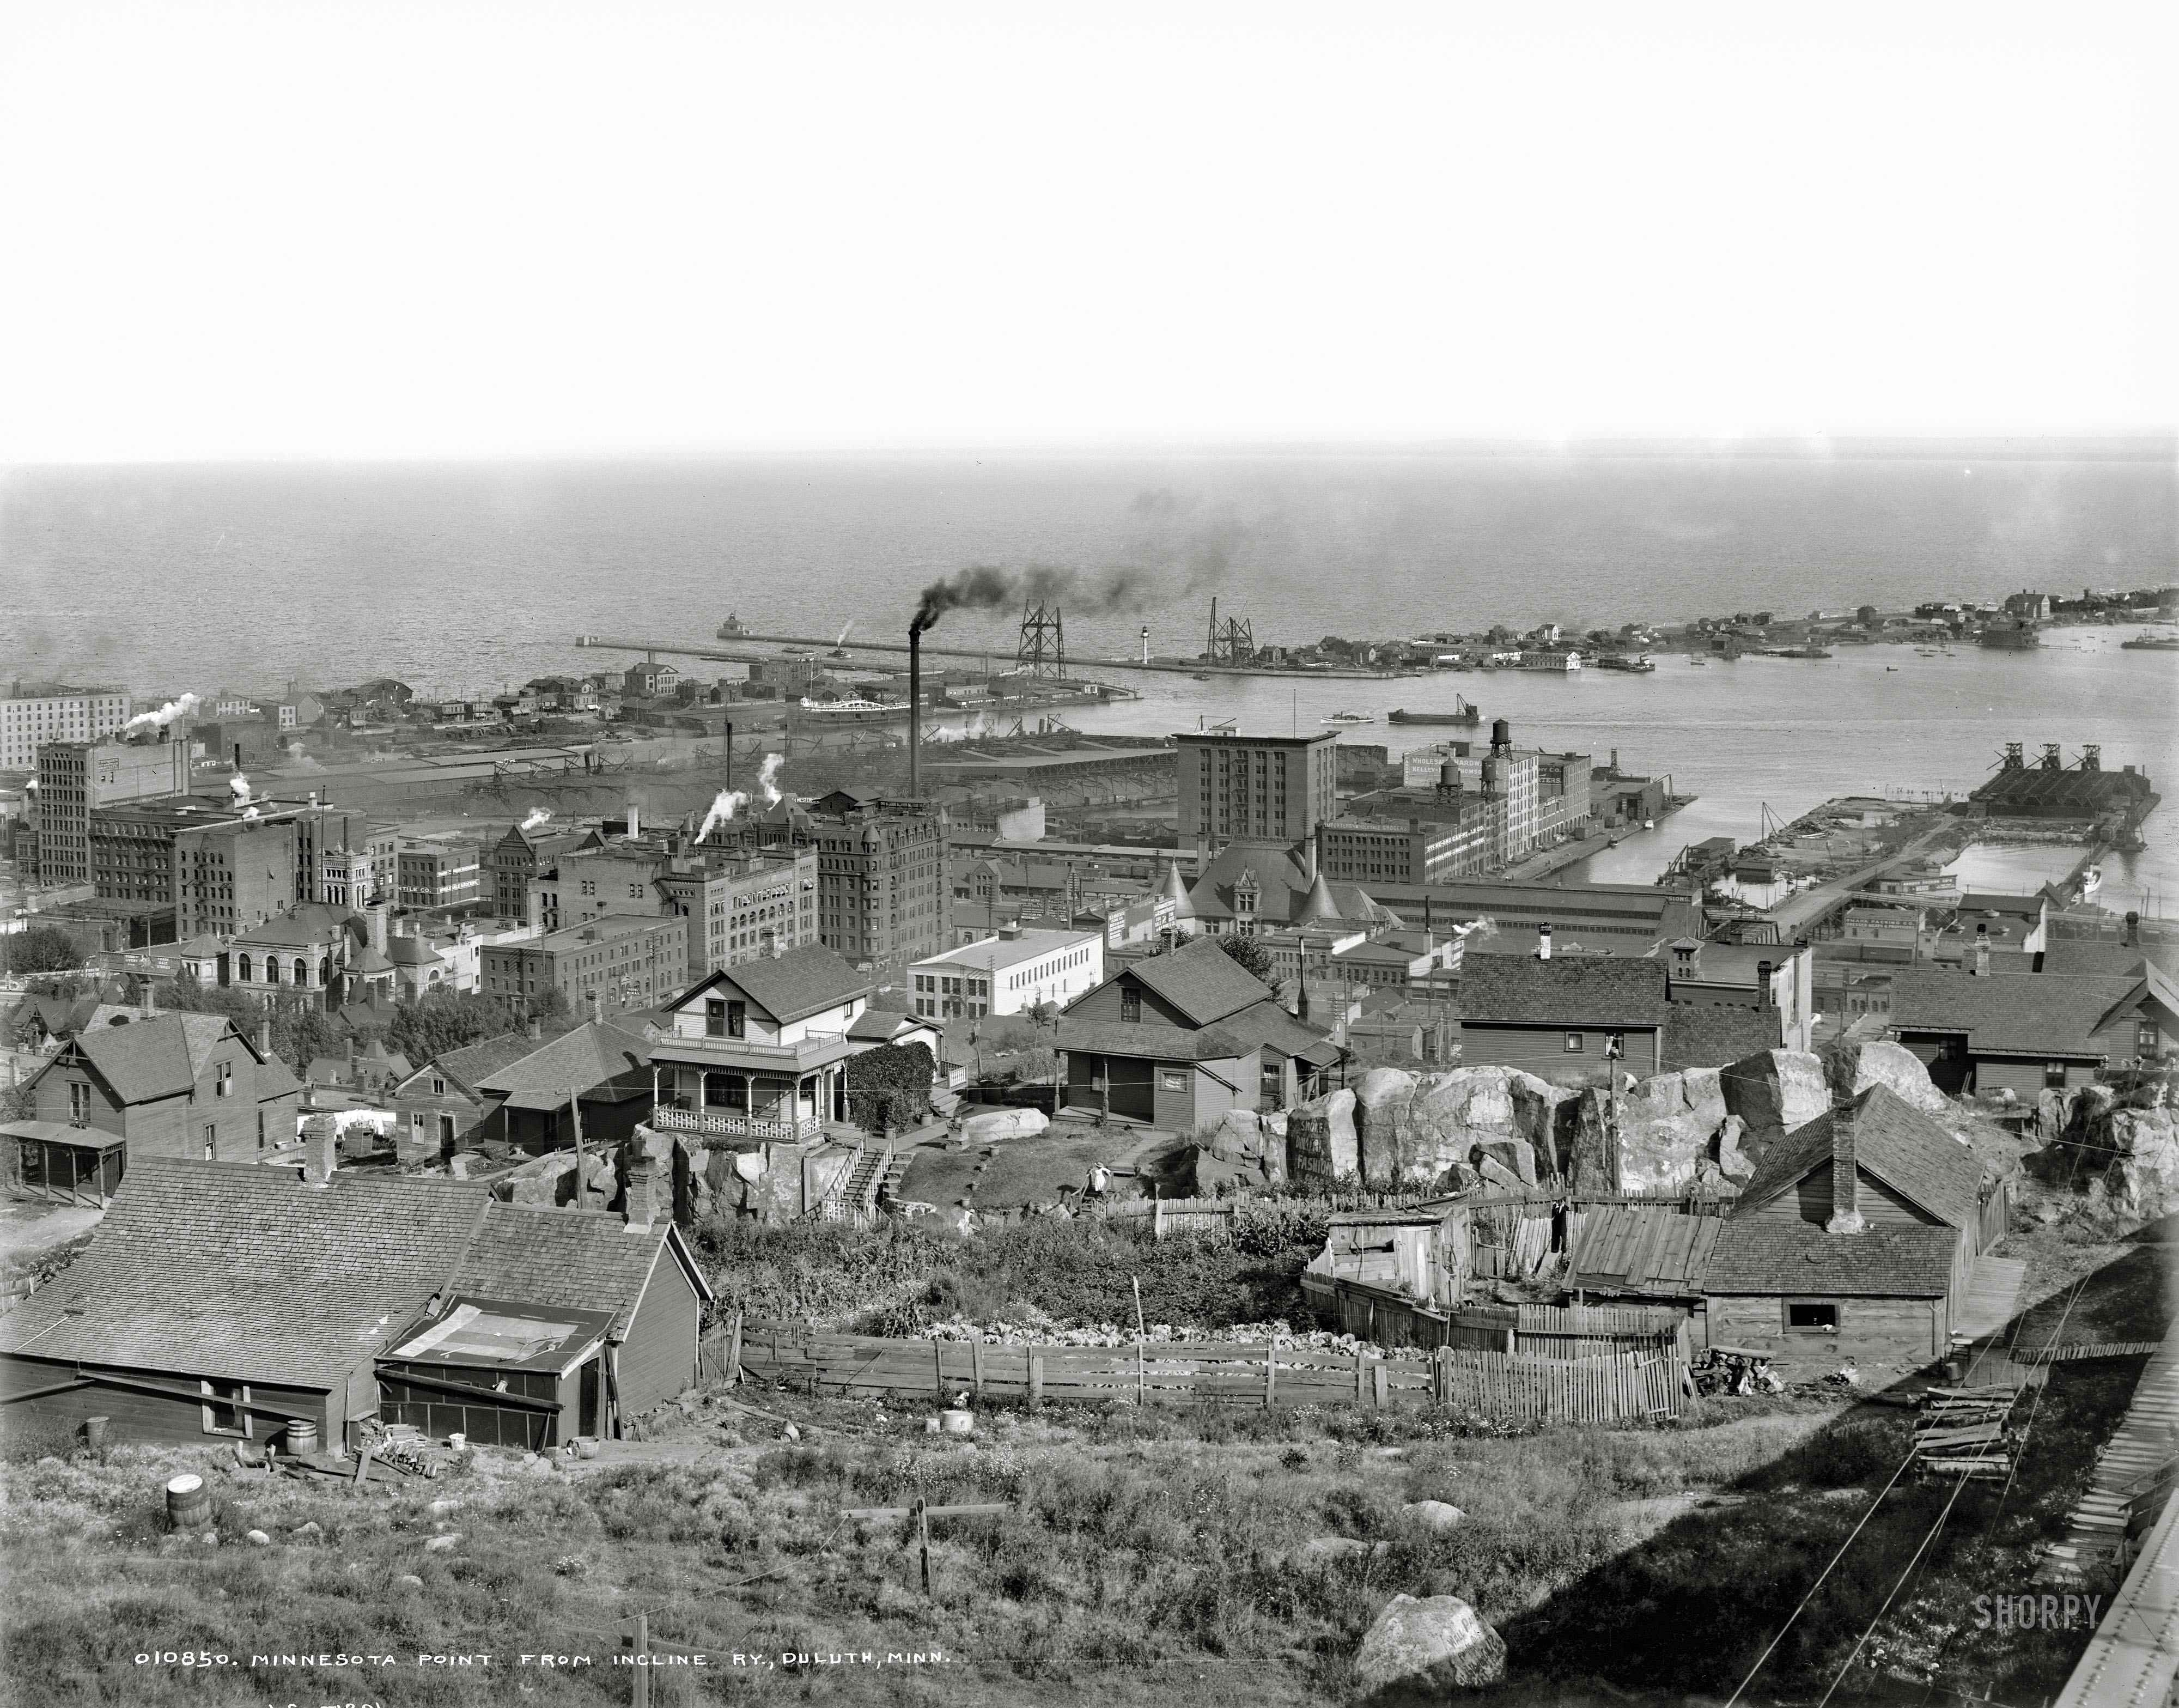 Duluth circa 1905. "Minnesota Point from incline railway." Another piece of the Zenith City  panorama. Detroit Publishing Co. glass negative. View full size.